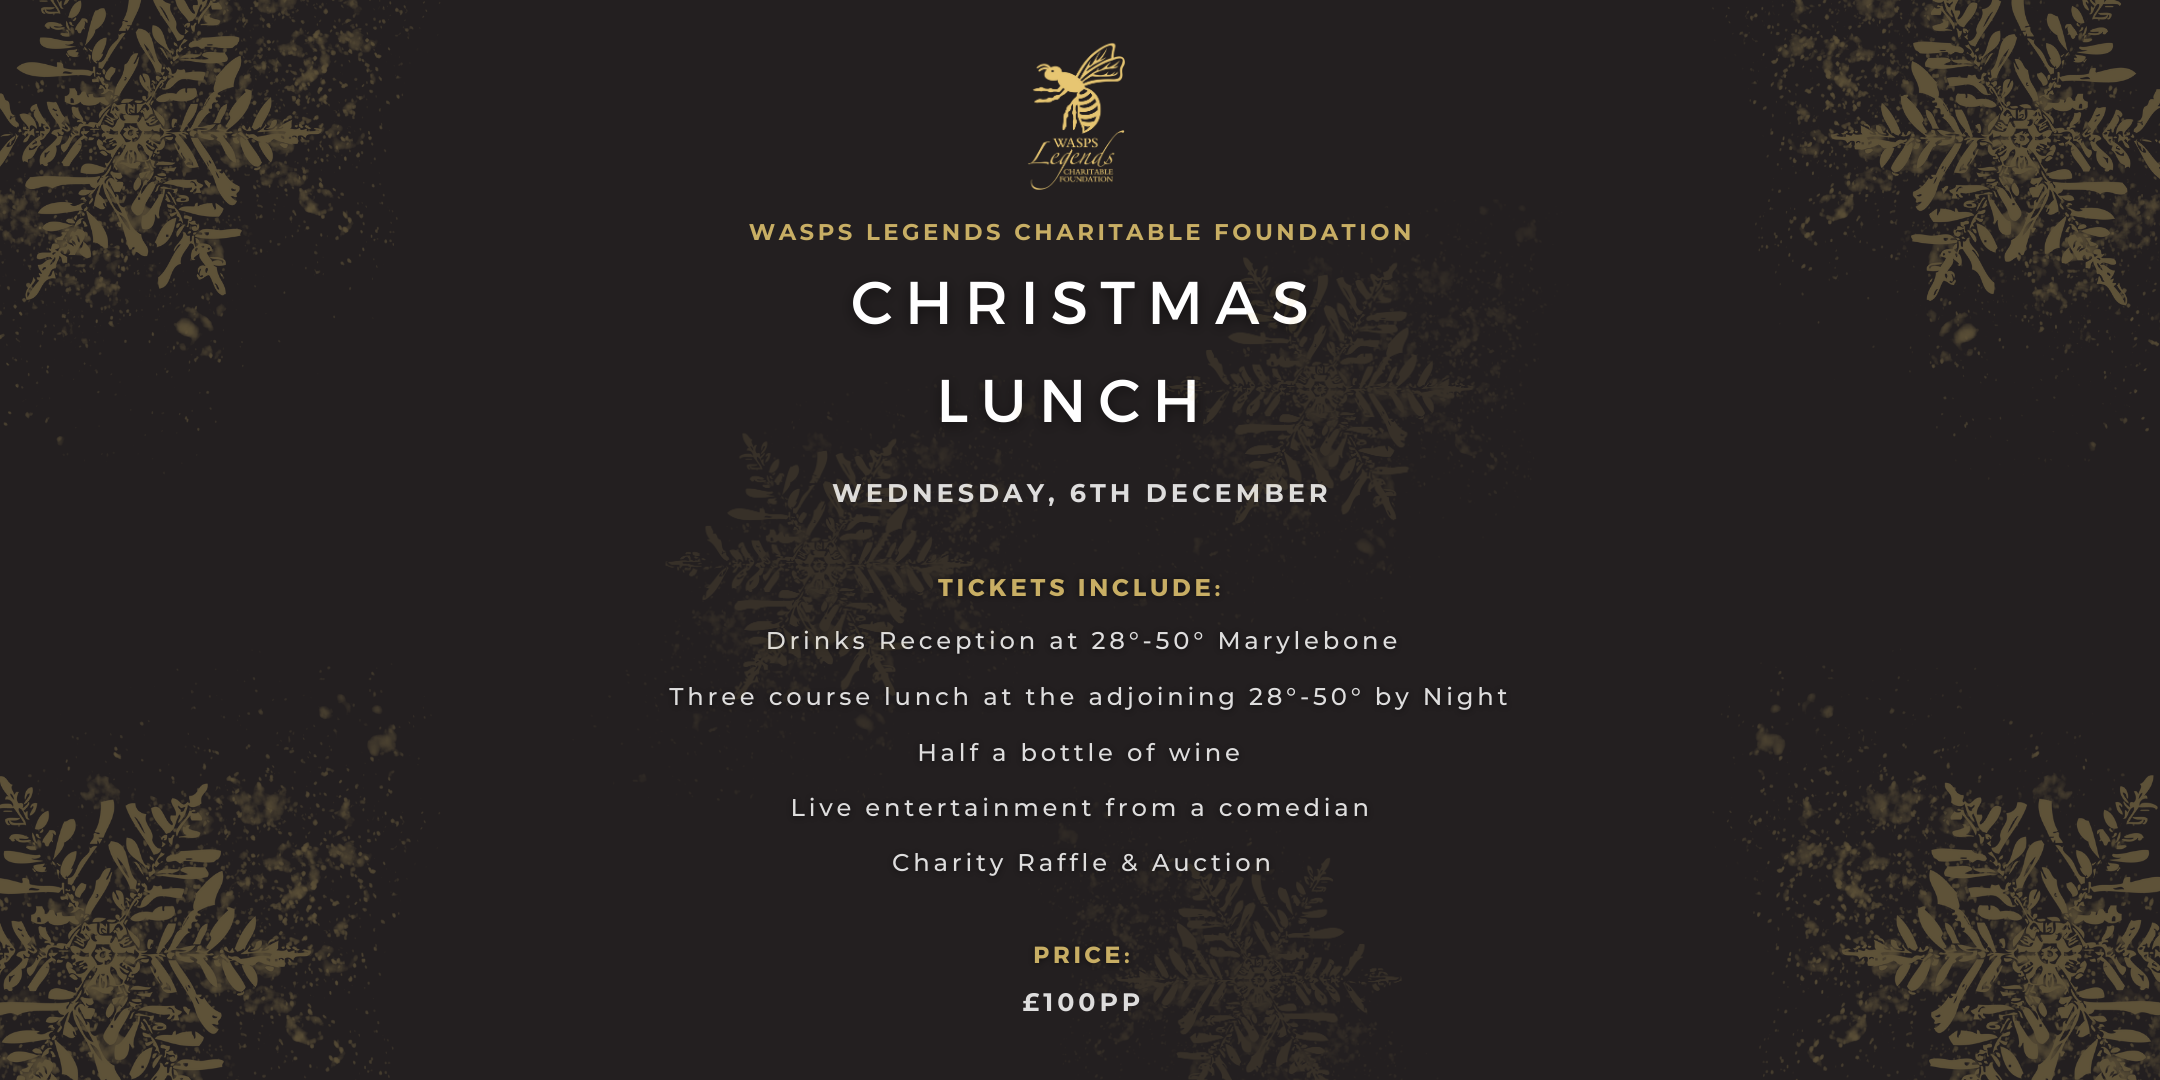 A flyer for our upcoming Christmas Lunch showing details of the event